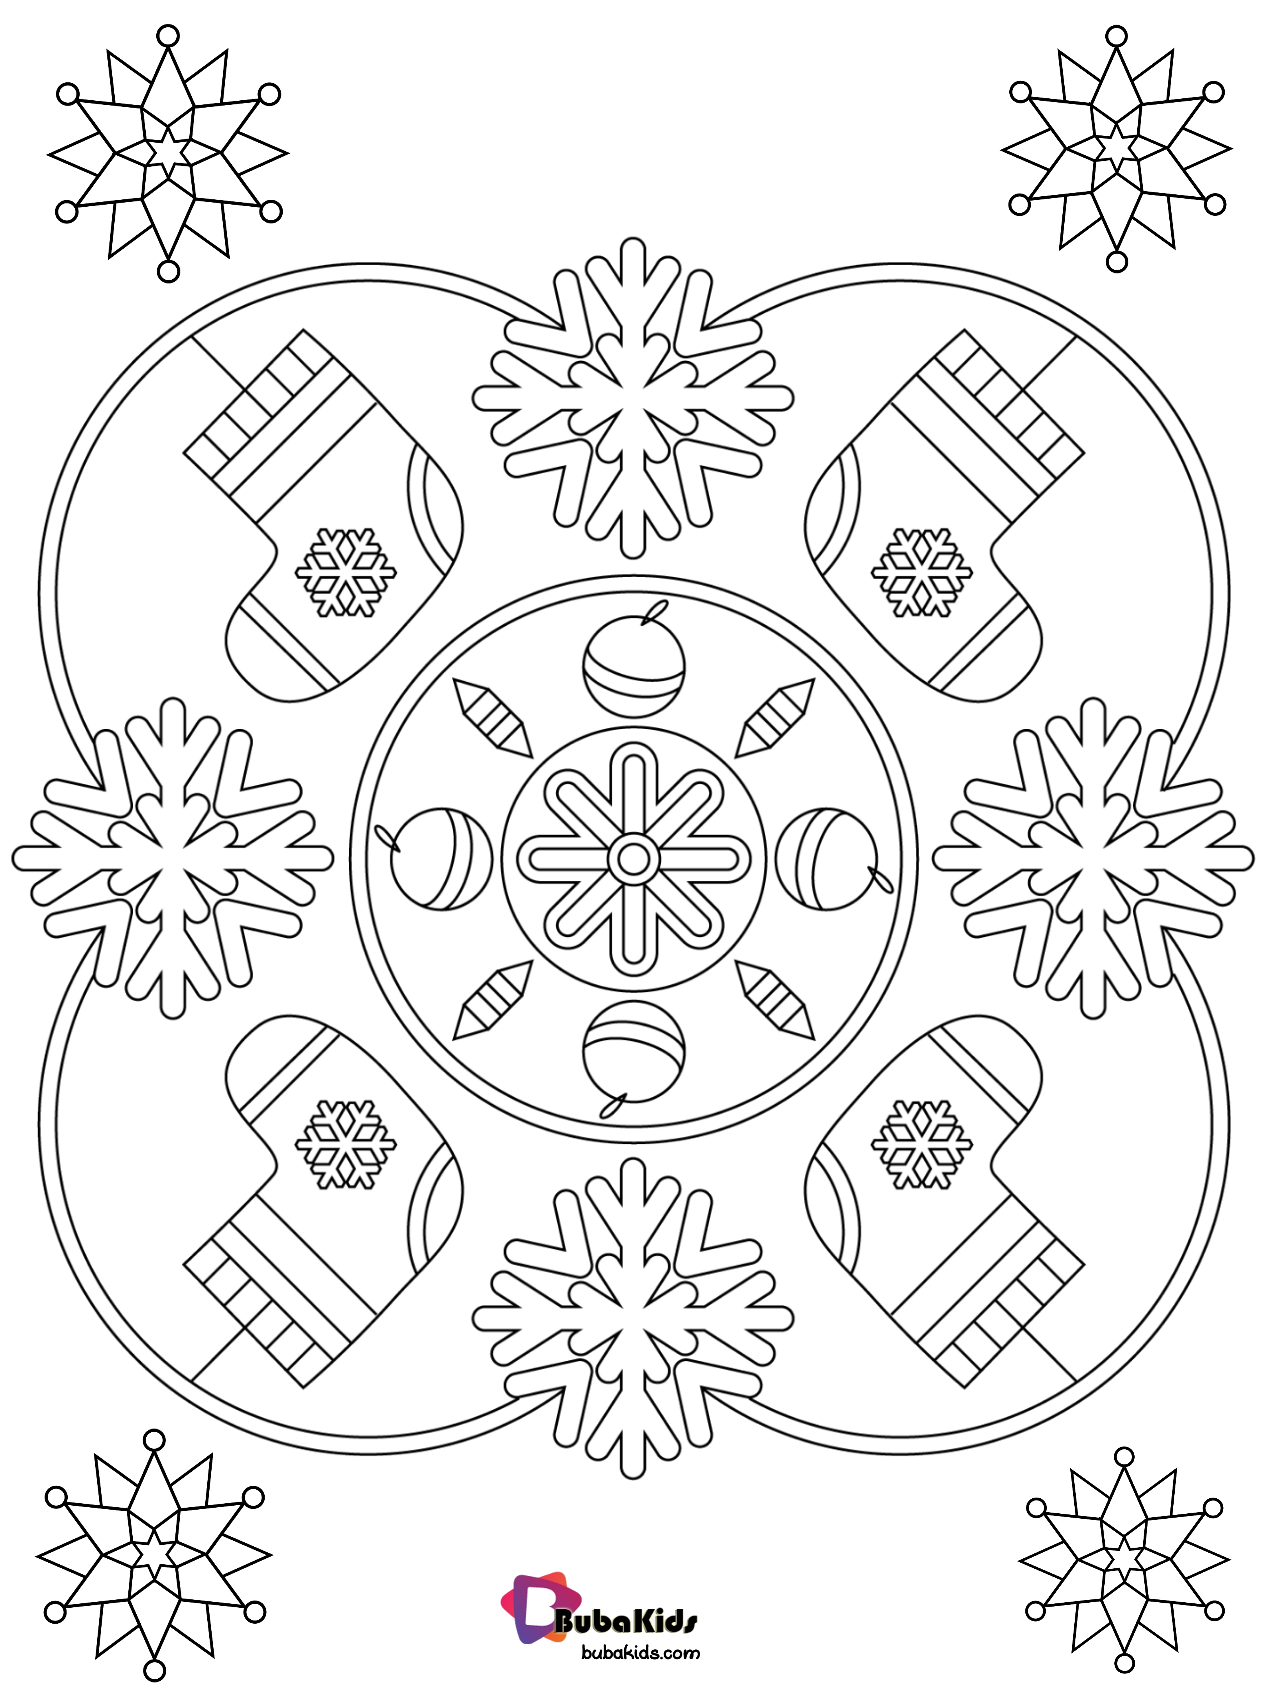 Winter socks and snowflakes coloring pages. Wallpaper